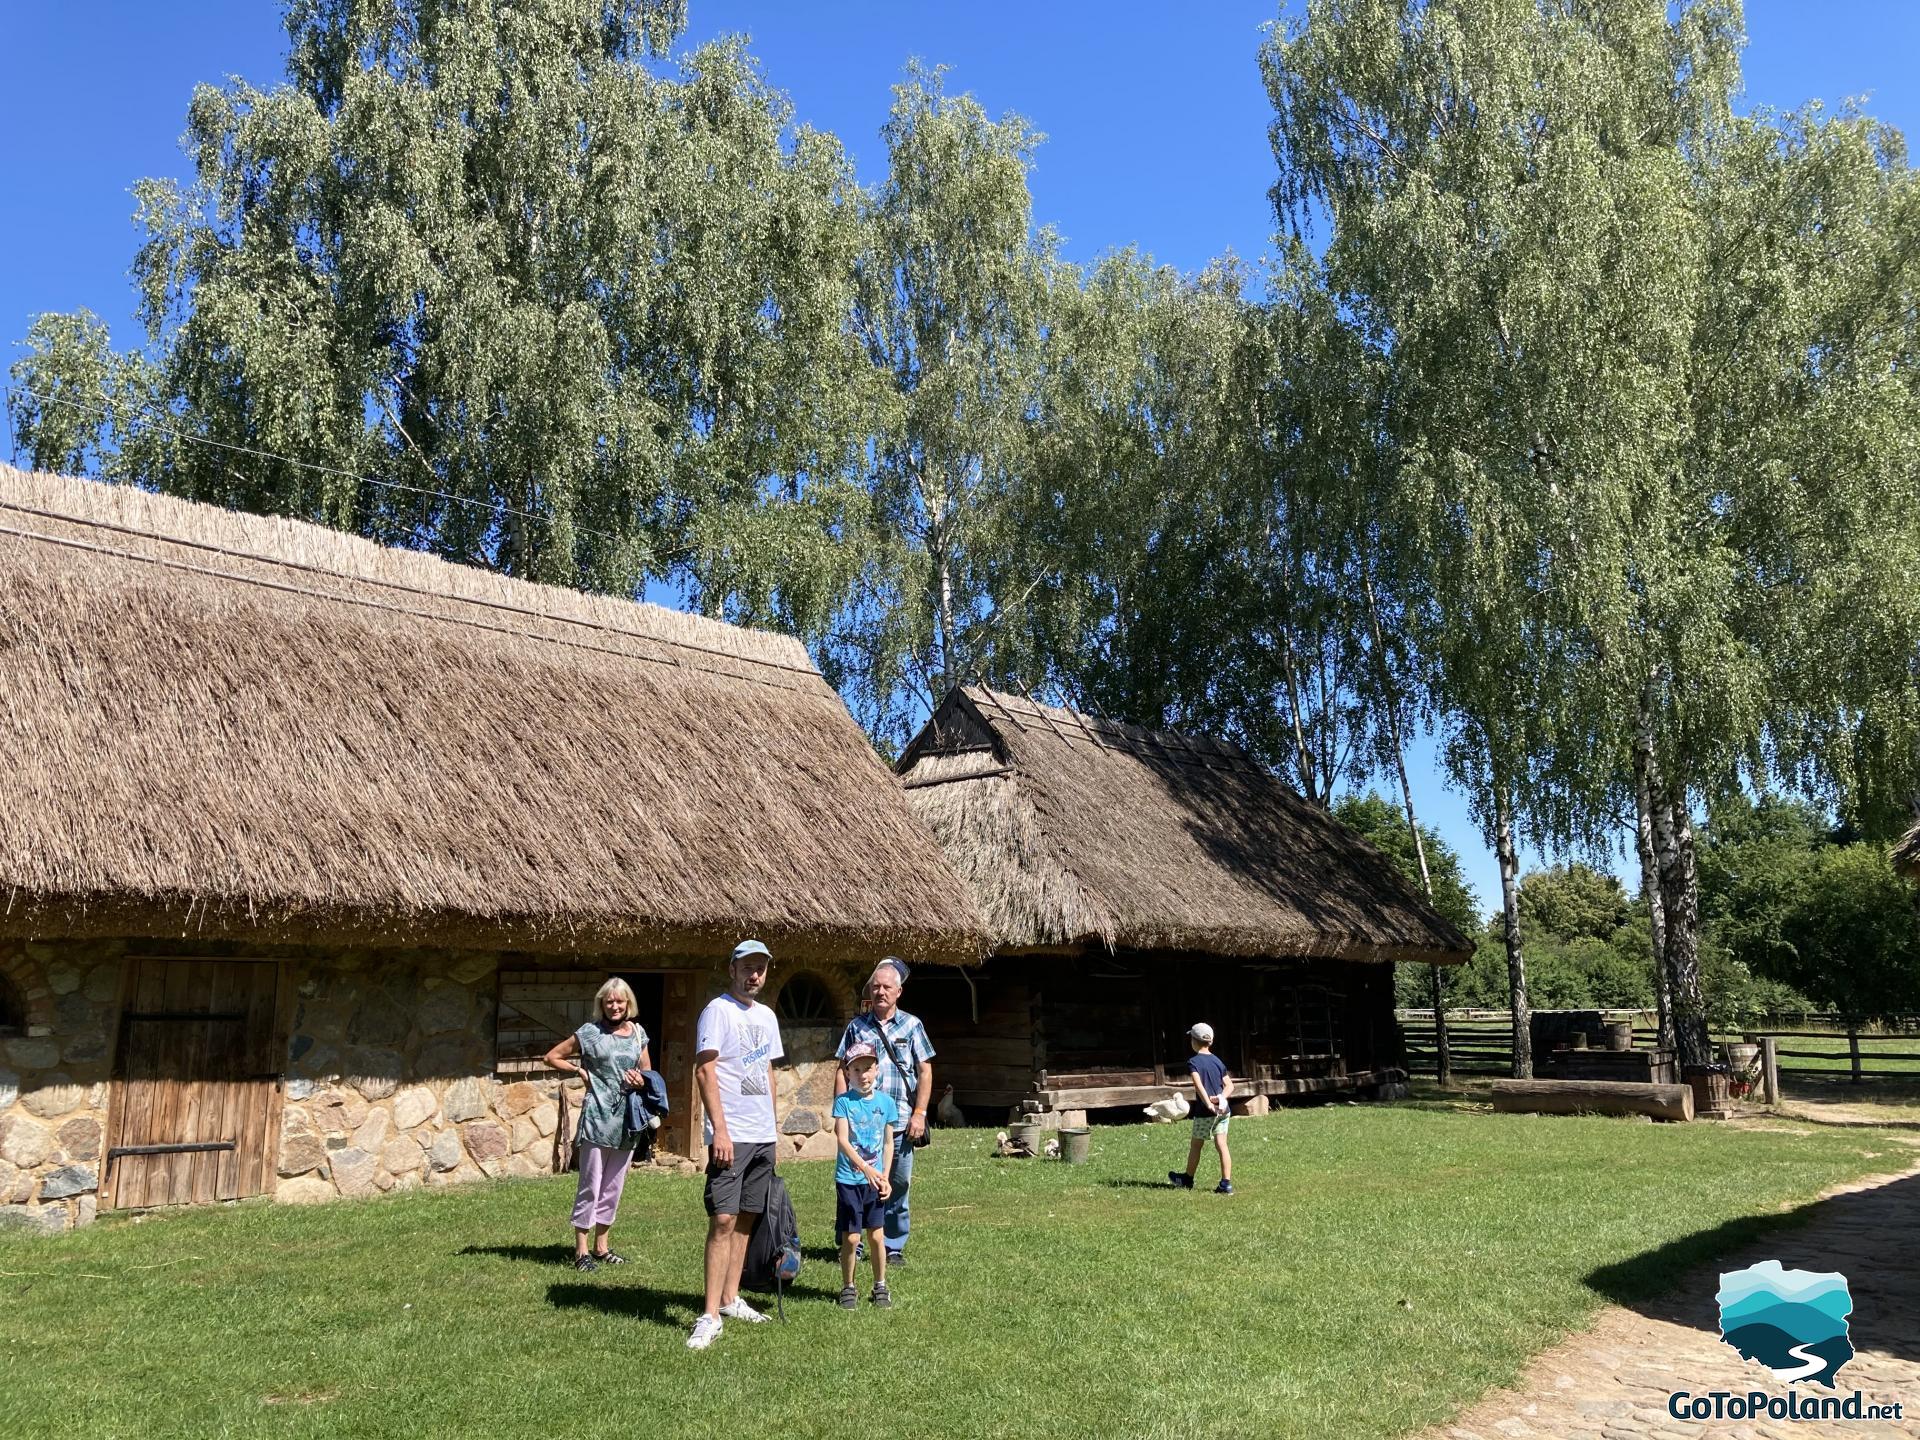 the family is standing in front of the huts, both wooden huts, thatched roofs, tall birch trees behind the huts